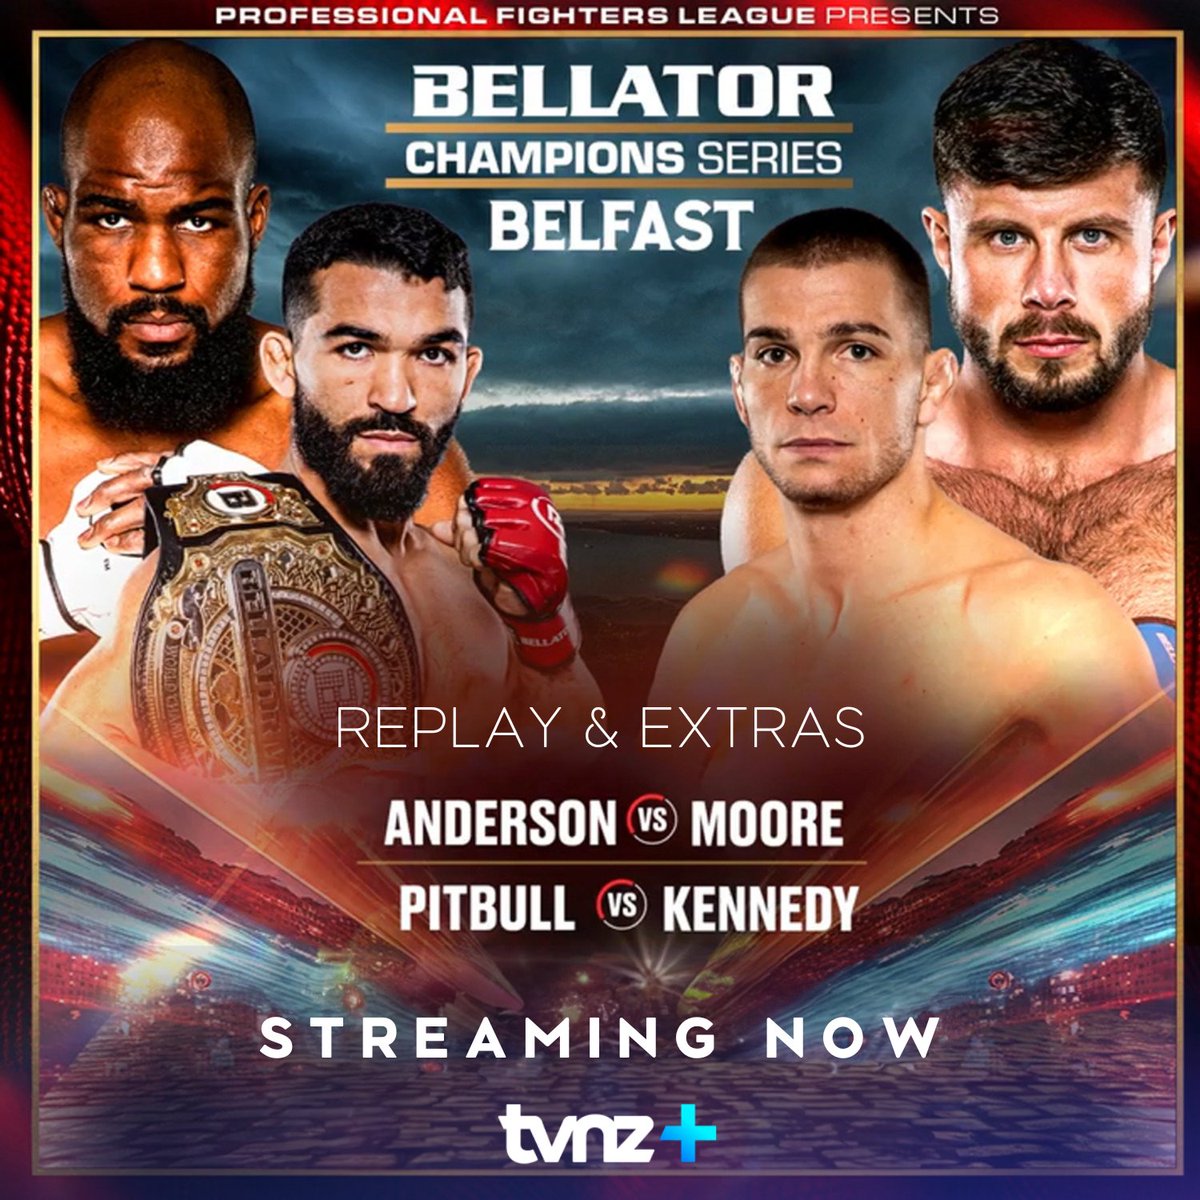 Corey Anderson has his first world title belt, and Patricio Pitbull held onto his at the Bellator Champions Series: Belfast. 🔥🥊 Anderson v Moore: Bellator Champs Series - Replay & Extras are streaming now on TVNZ+